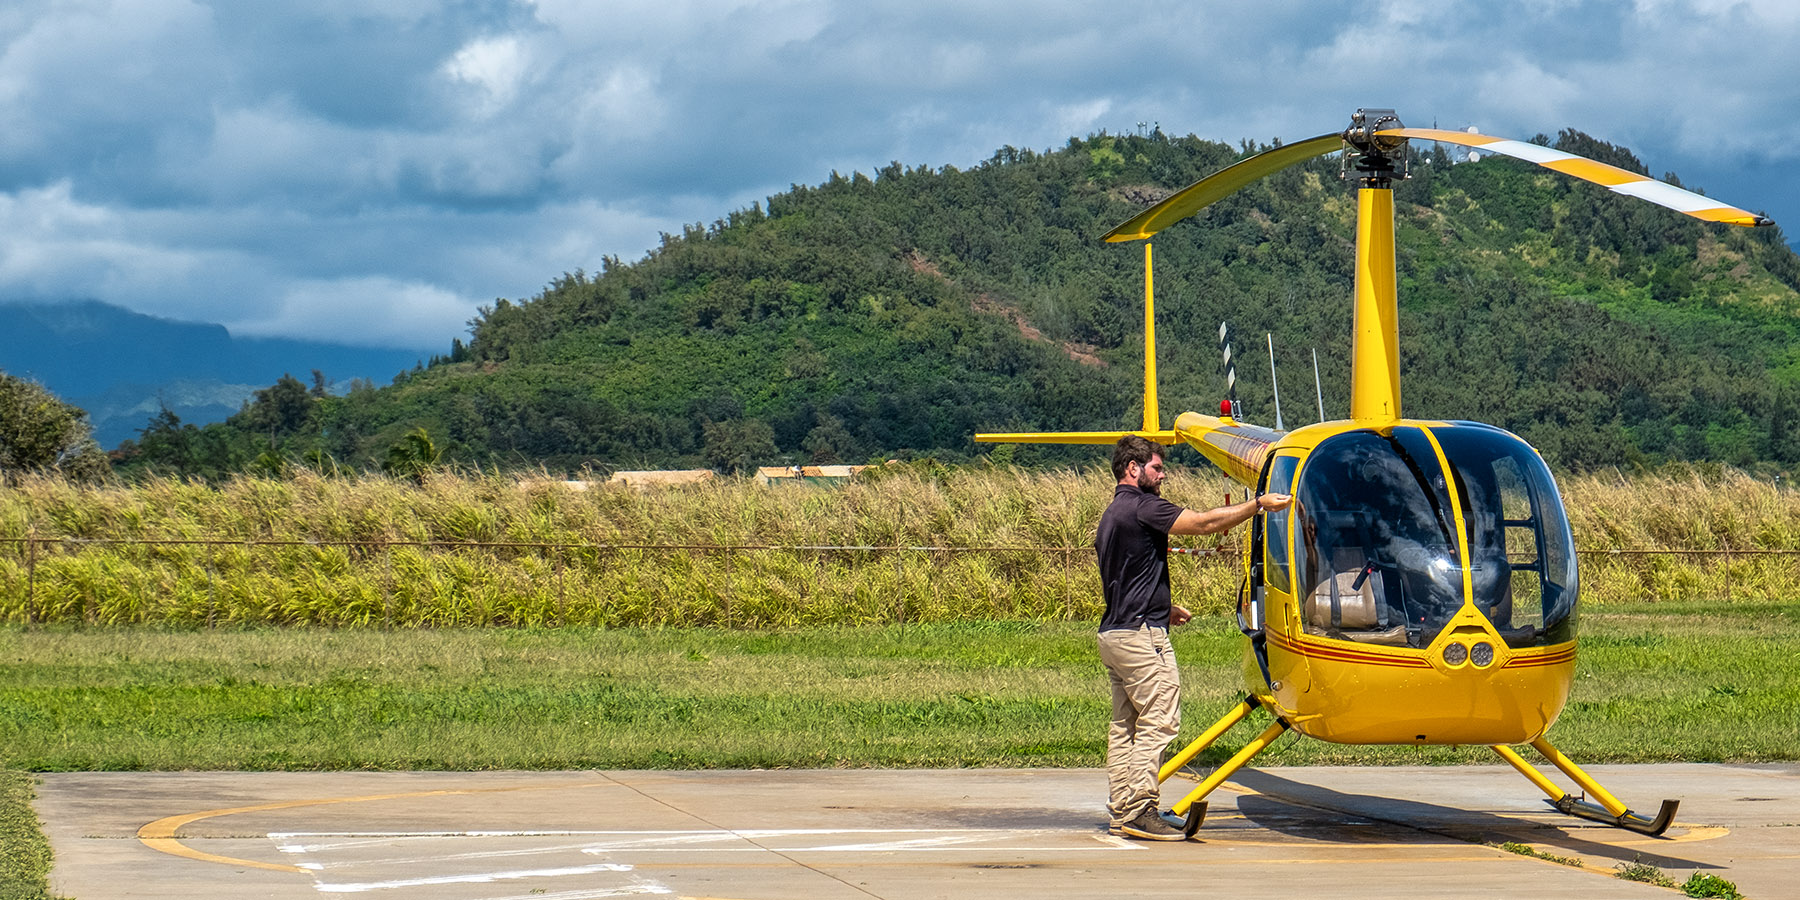 Jose, our pilot, is taking the doors off the R44 helicopter in preparation for our no-doors flight